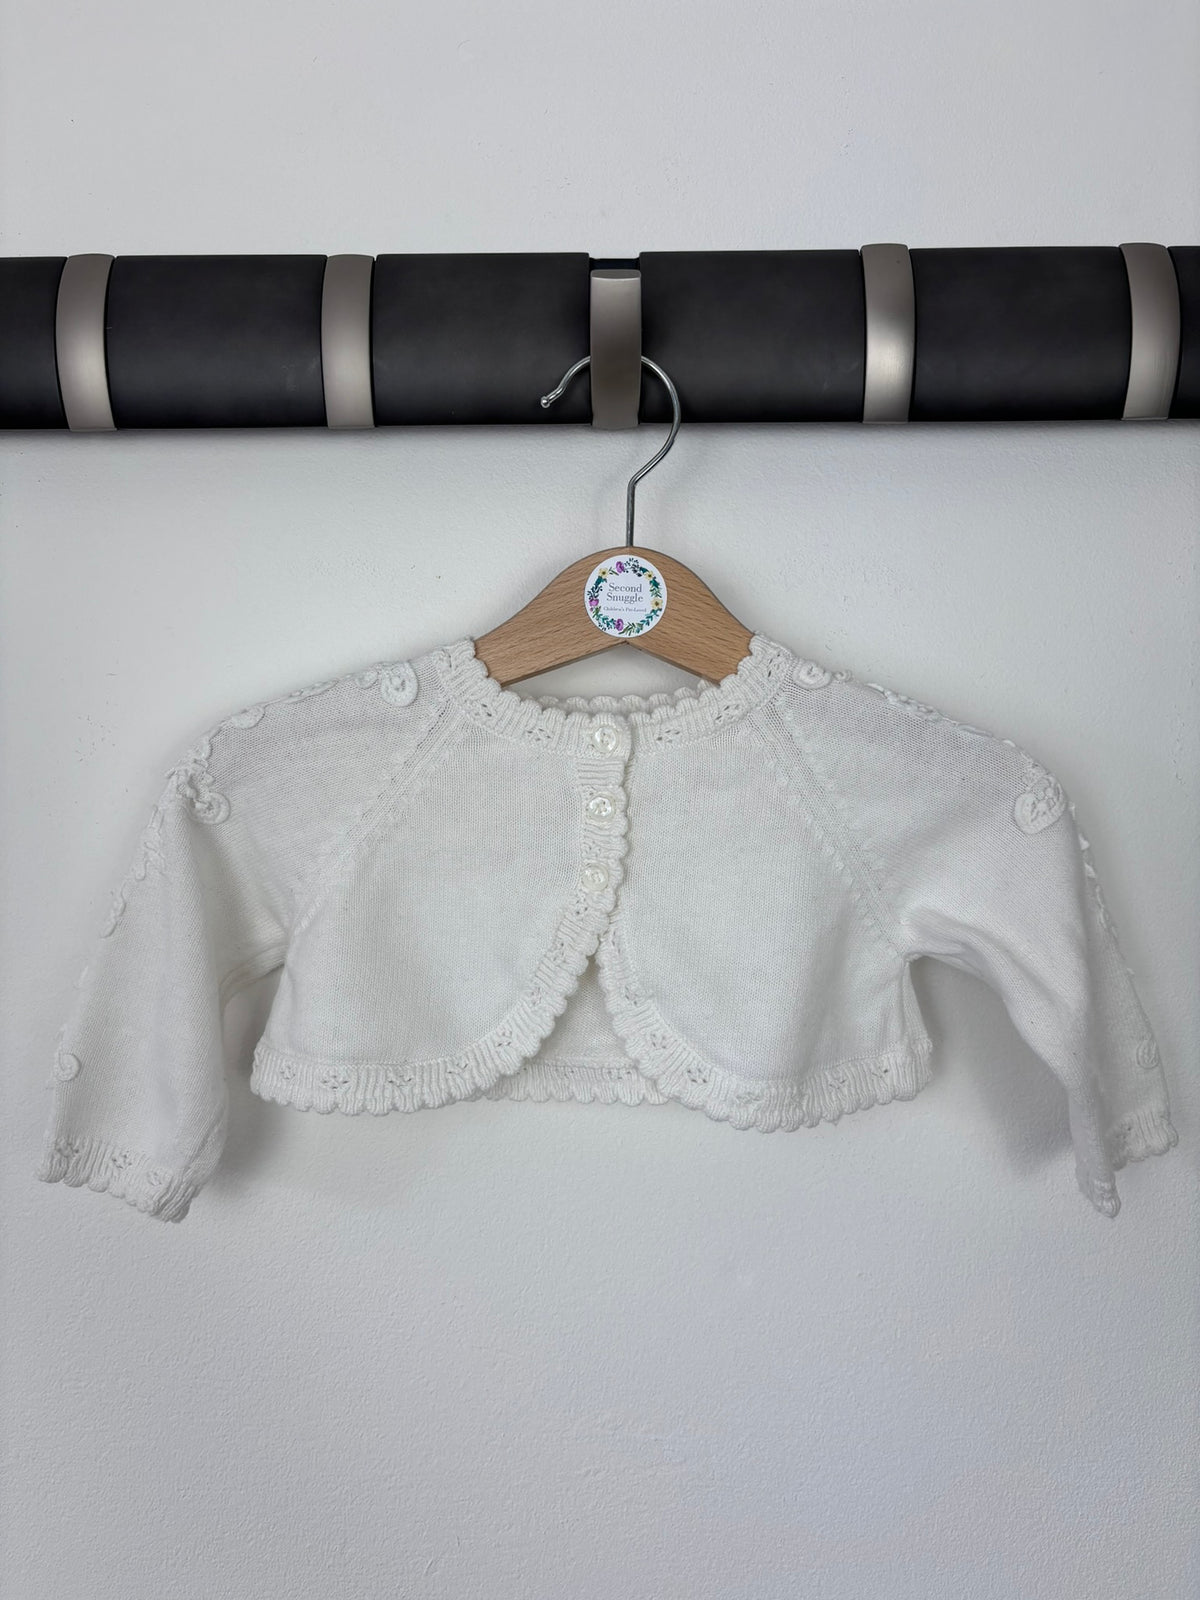 Mamas & Papas 0-3 Months-Cardigans-Second Snuggle Preloved